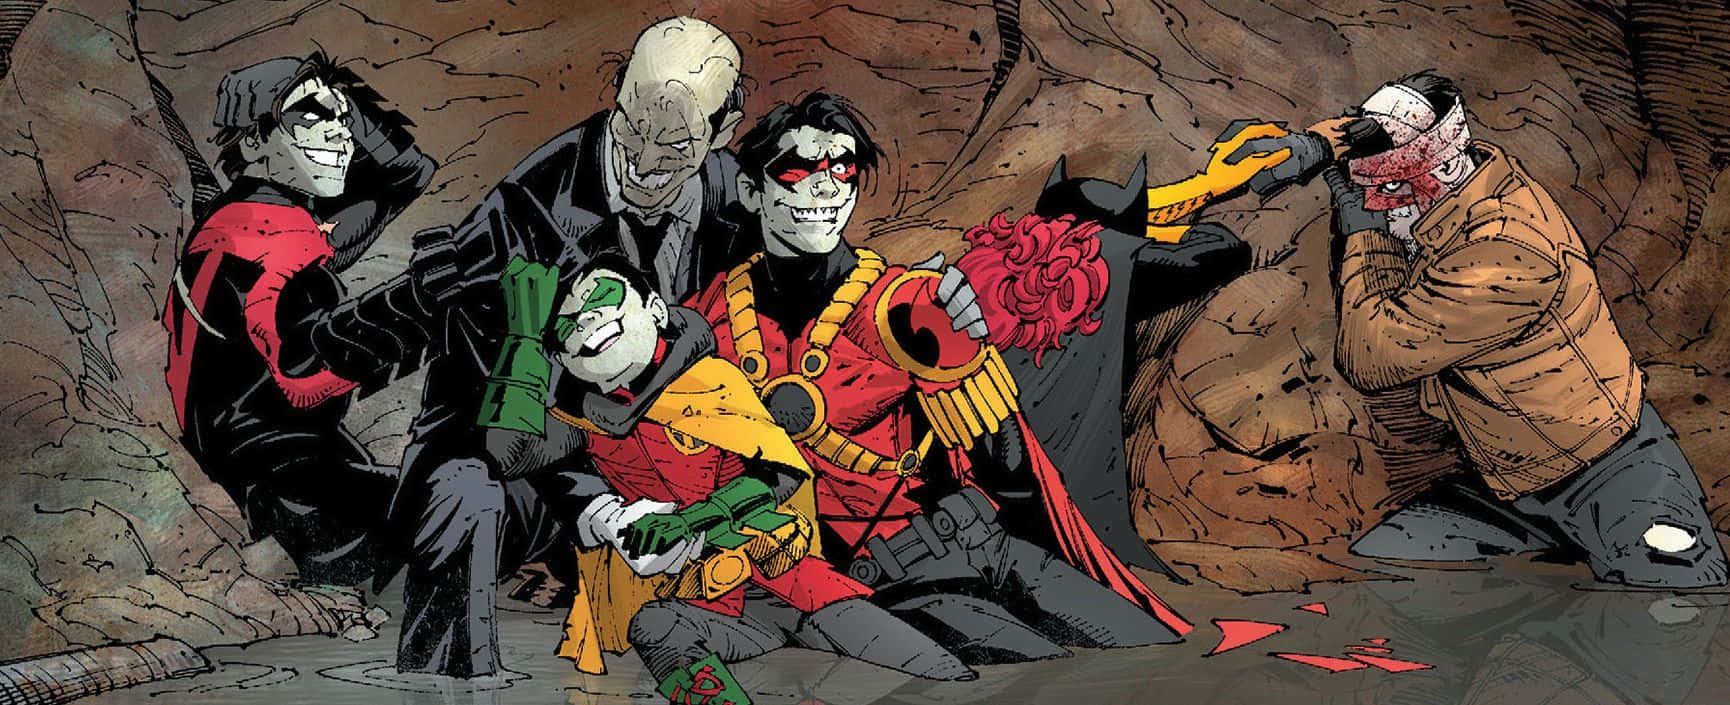 Batman mourning the loss of Robin in Death in the Family comic storyline. Wallpaper